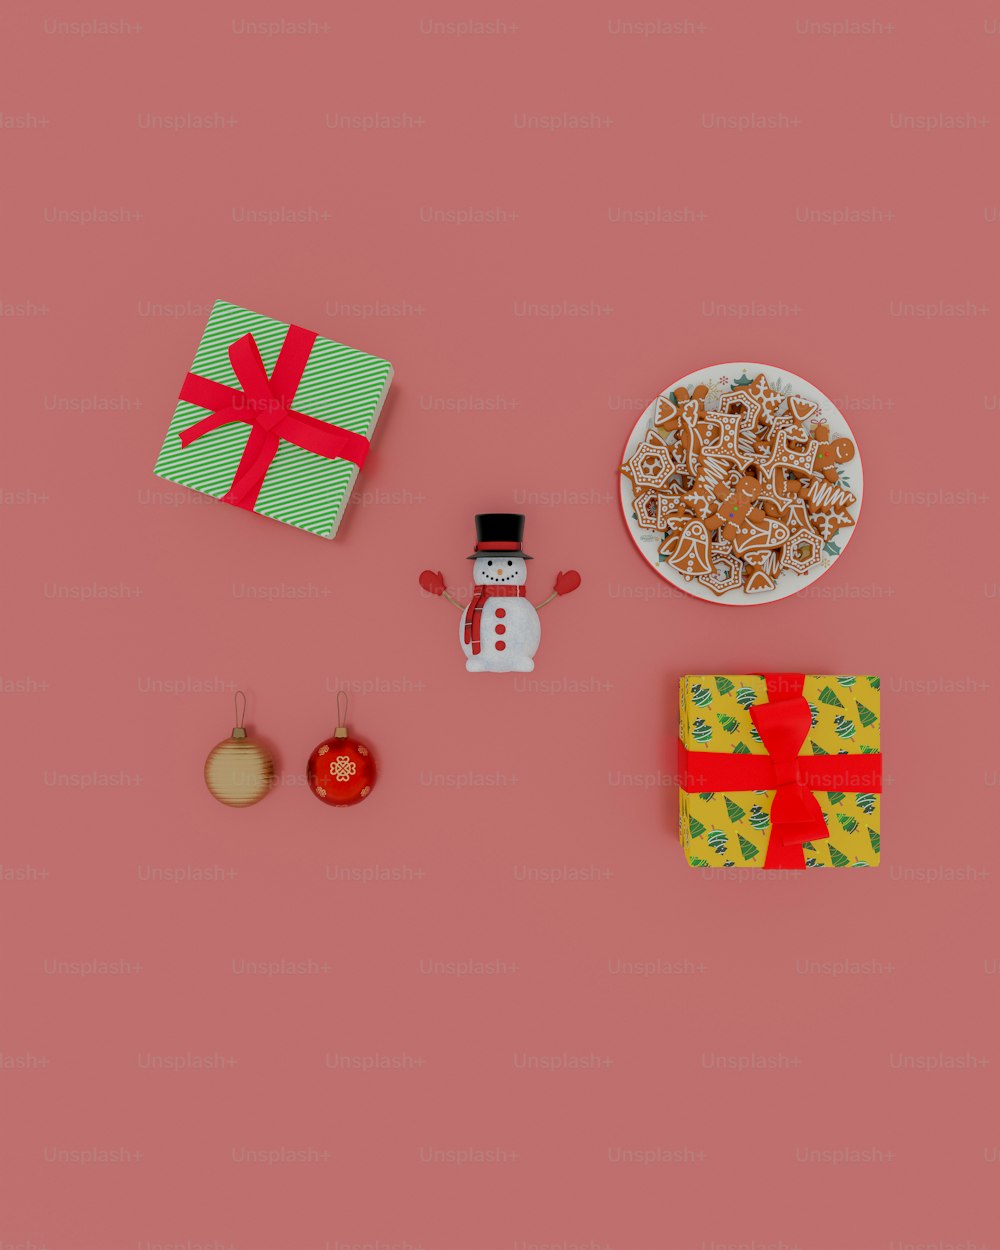 a plate of food next to a box of cereal and a christmas ornament